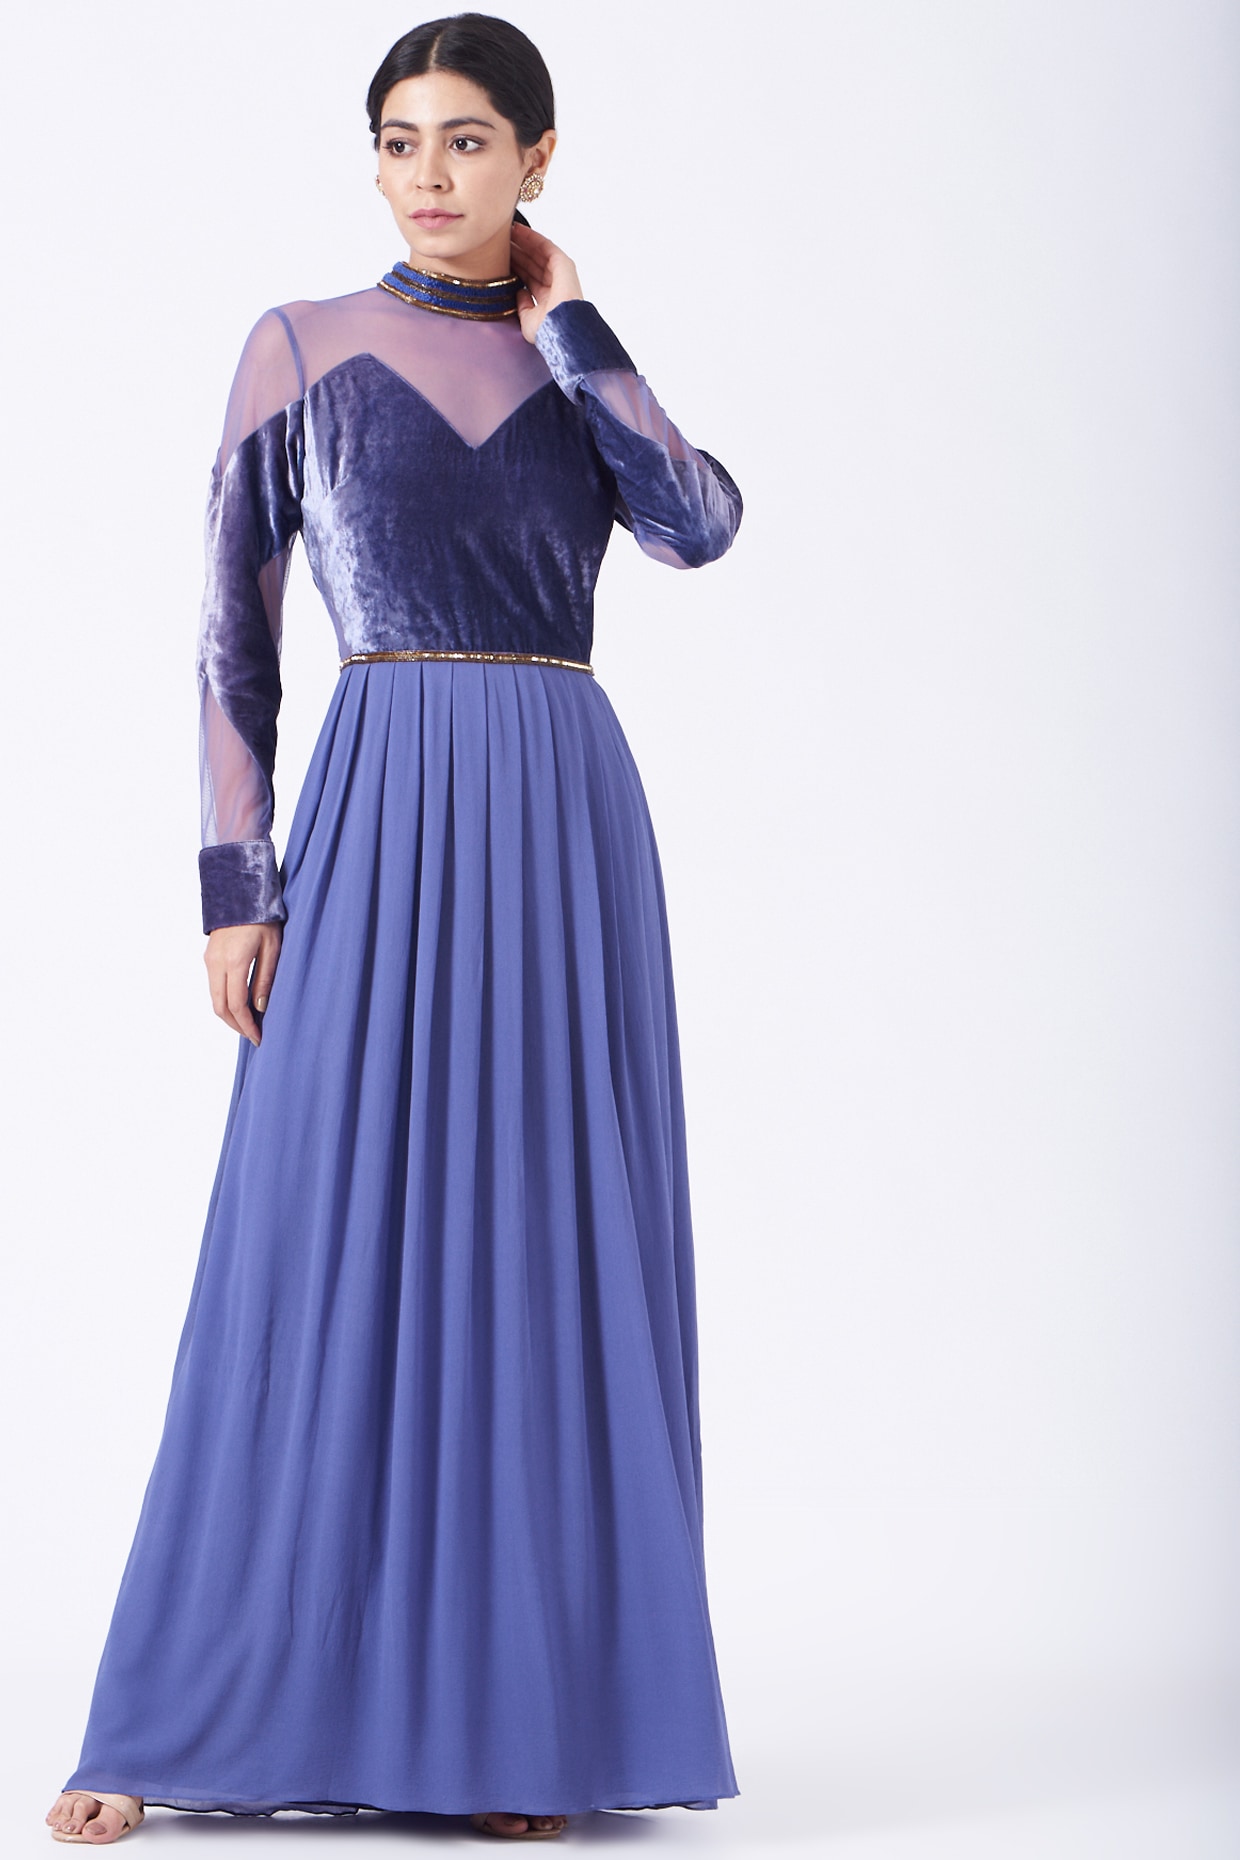 Blue Ikkat pleated Dress with hand embroidered Pockets and Yoke